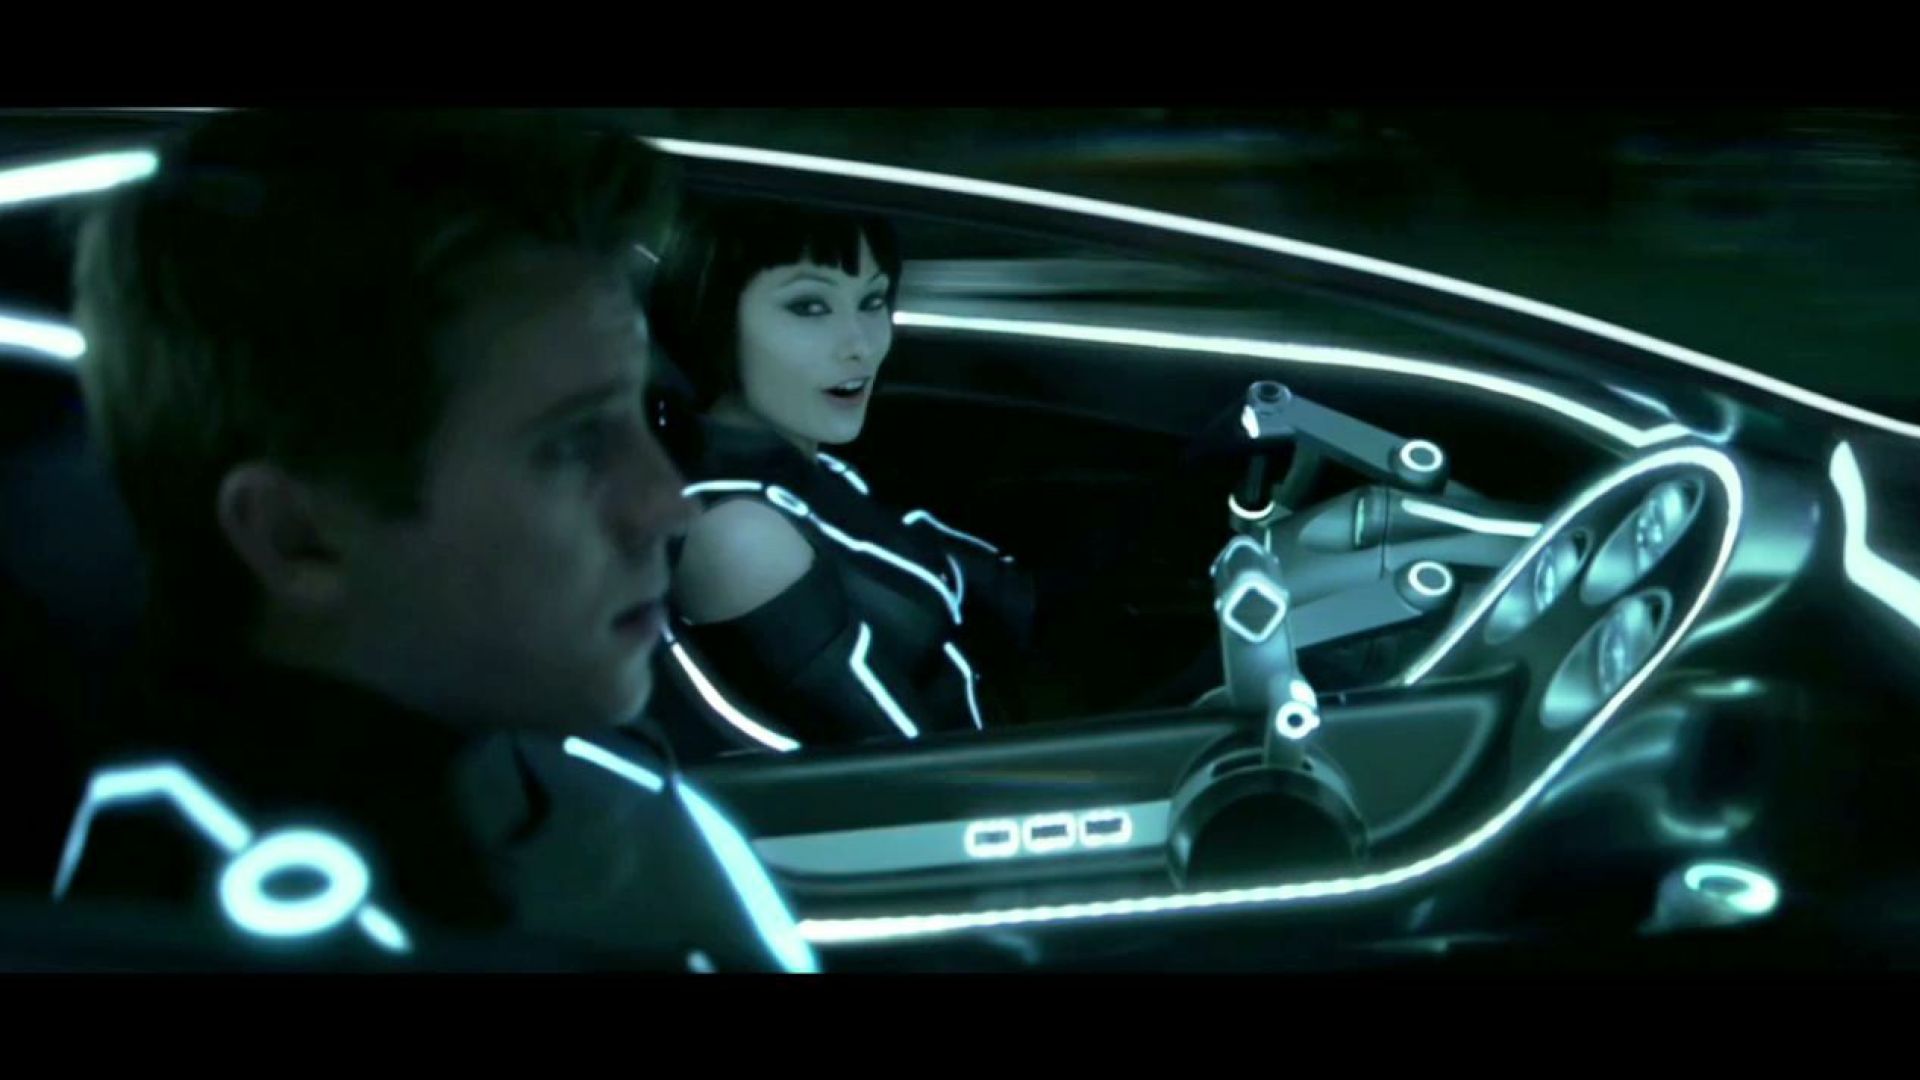 In the Car with Quorra in Tron: Legacy